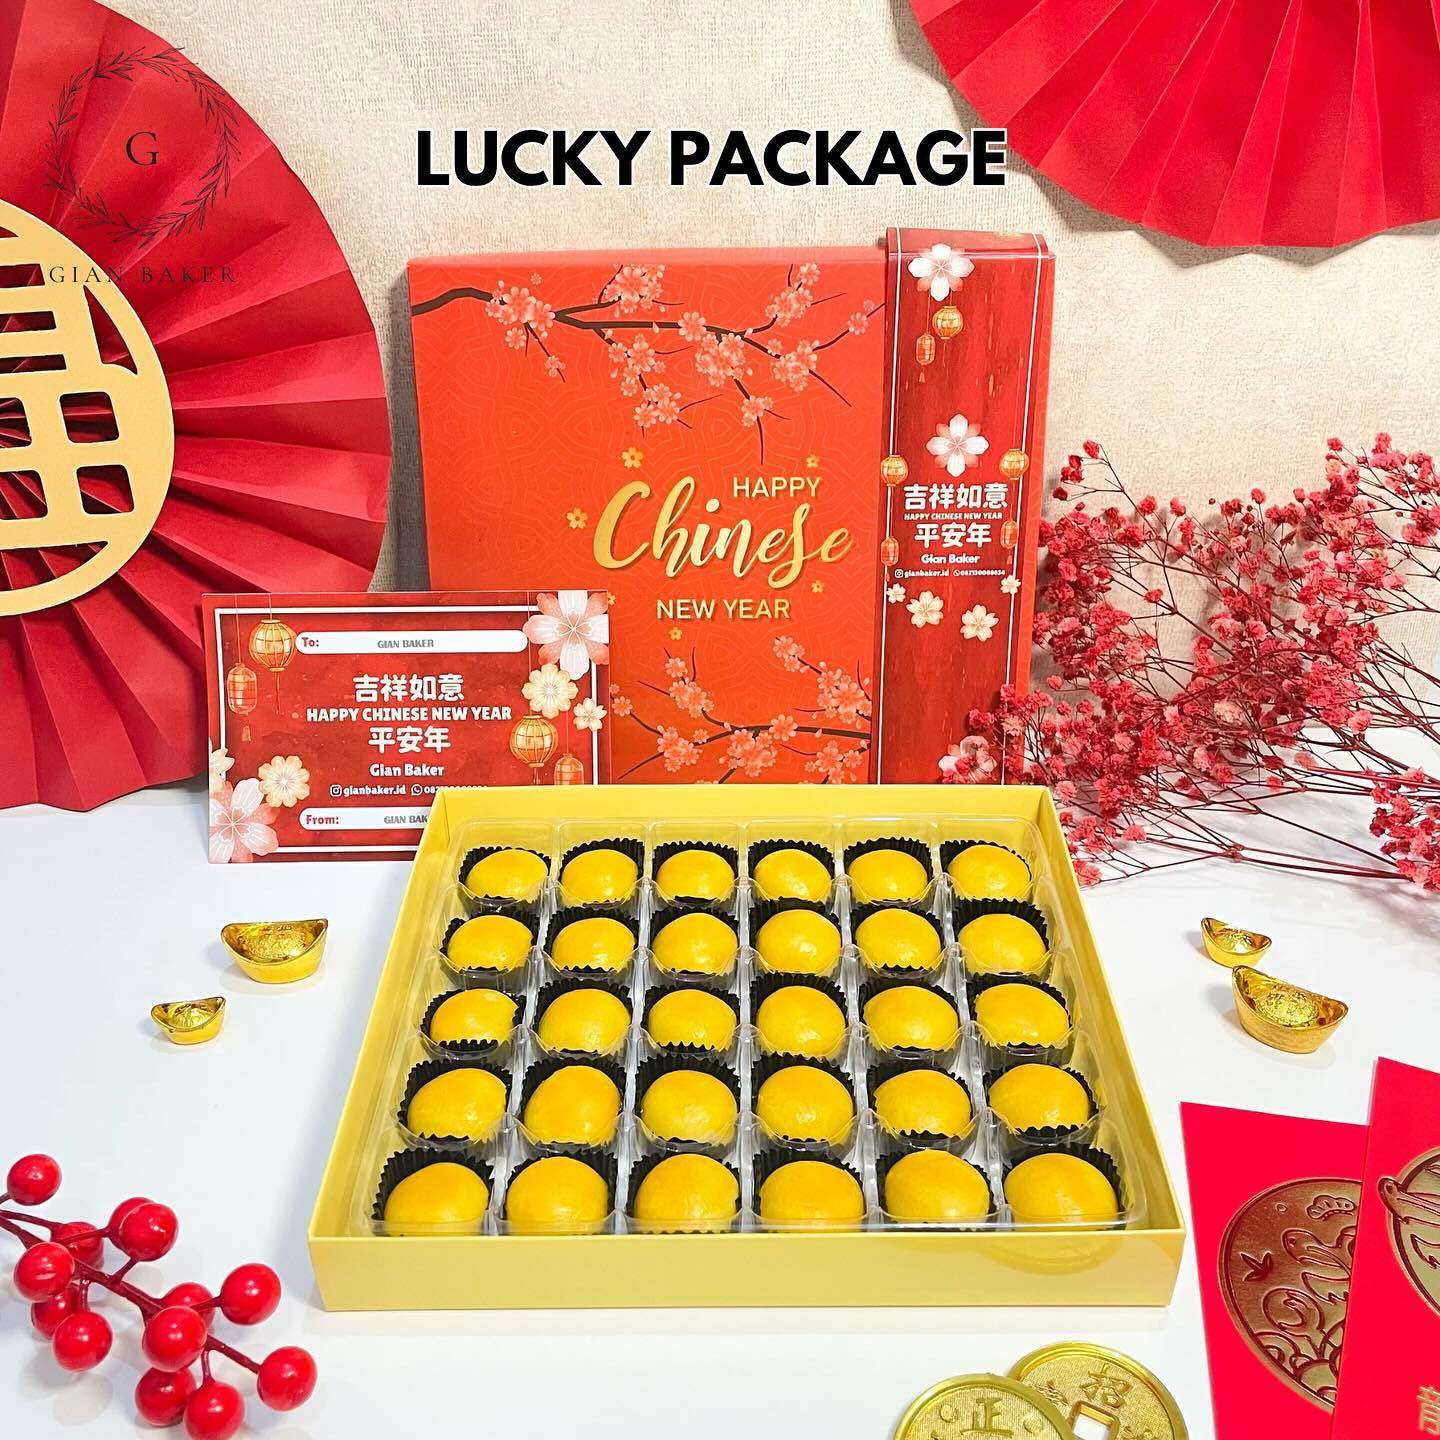 LUCKY PACKAGE HAMPERS